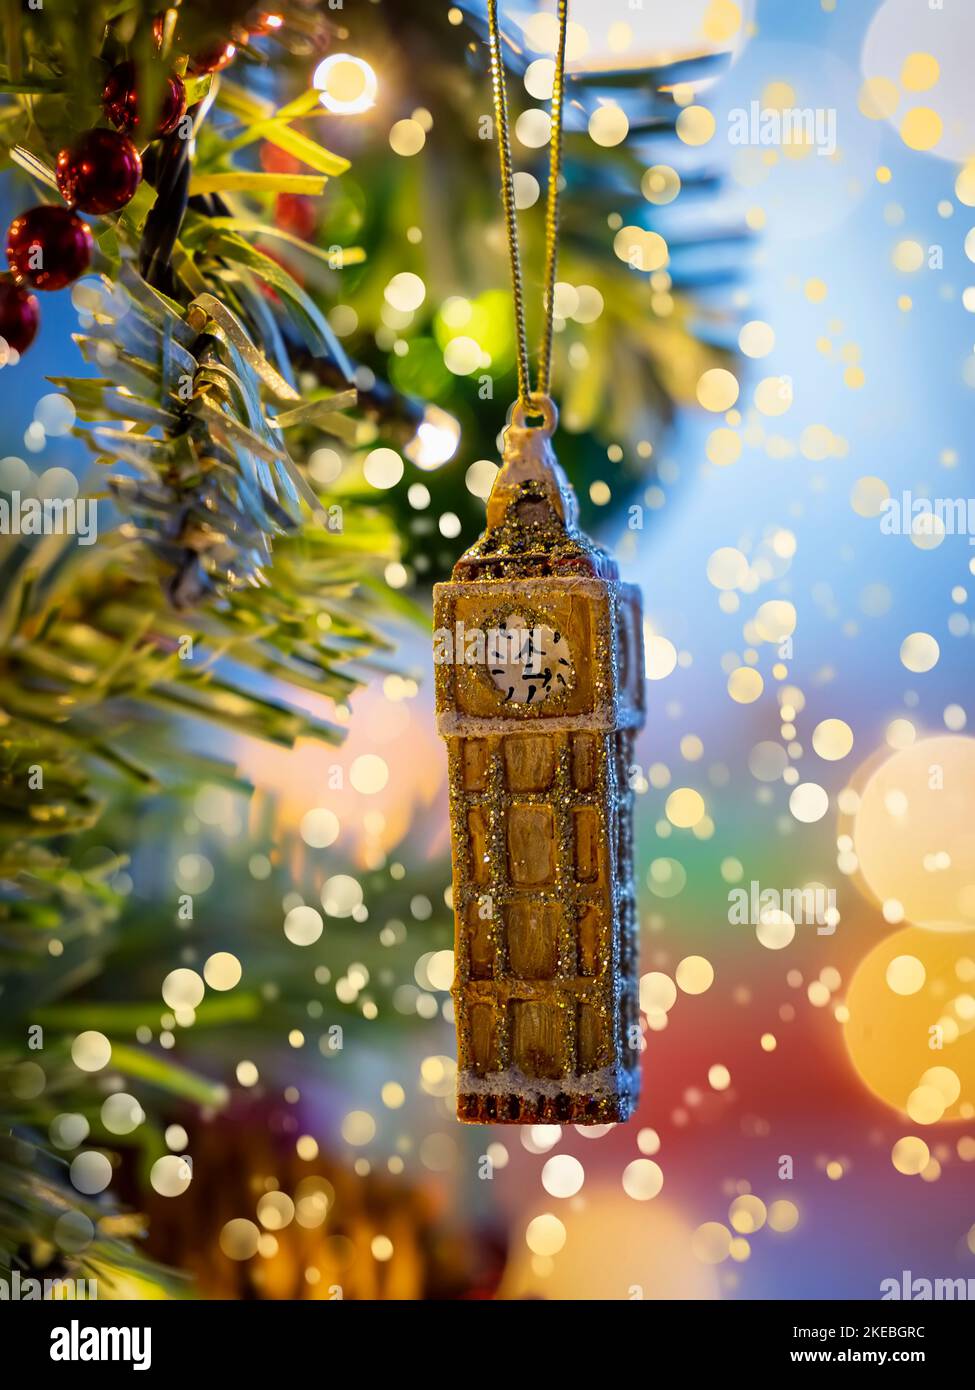 A little, golden Big Ben tower from London as a christmas ornament Stock Photo